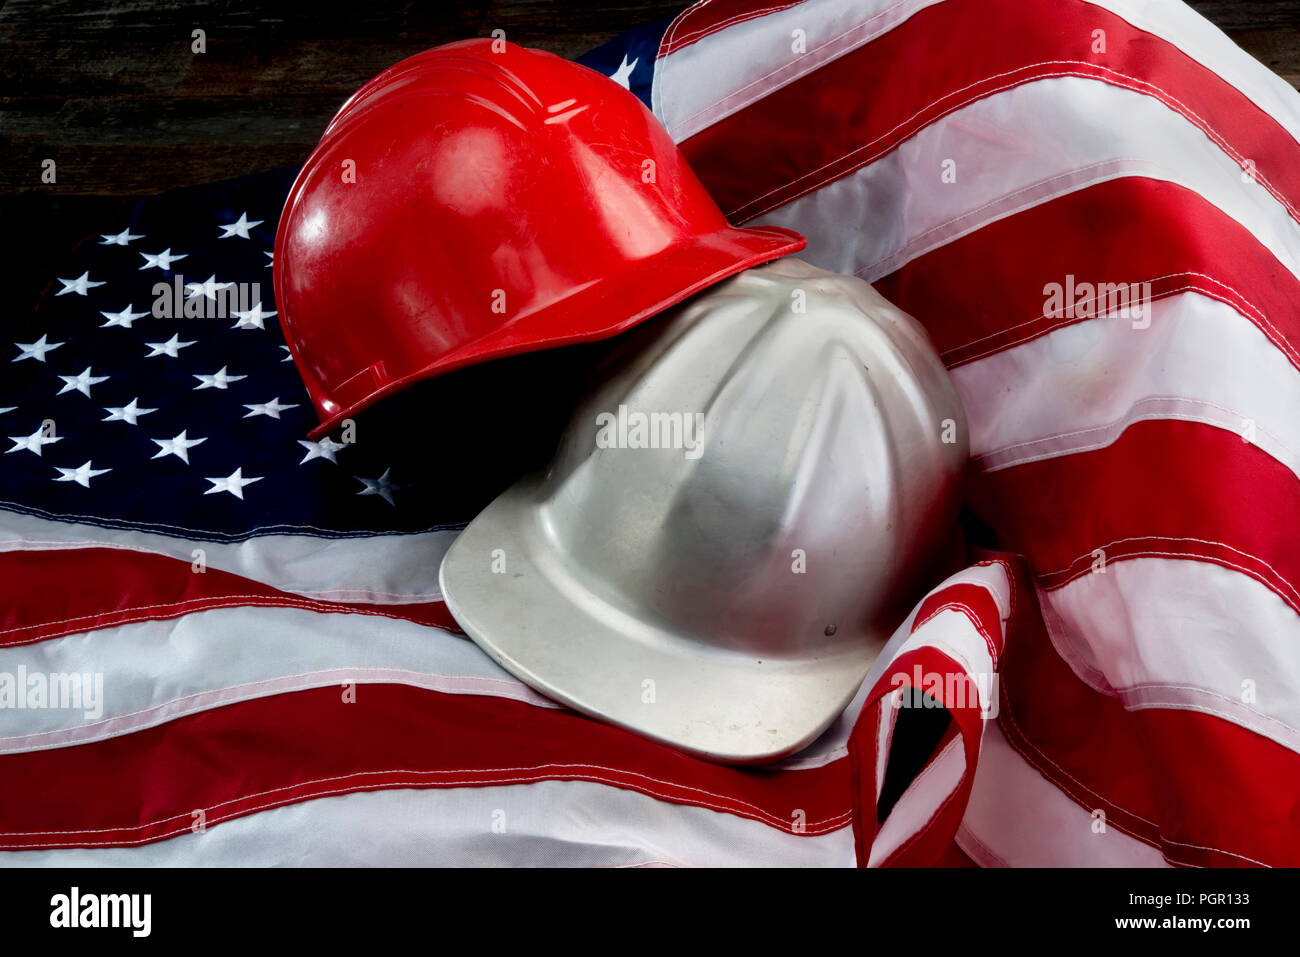 America at its greatest with flag and hard hats. Stock Photo